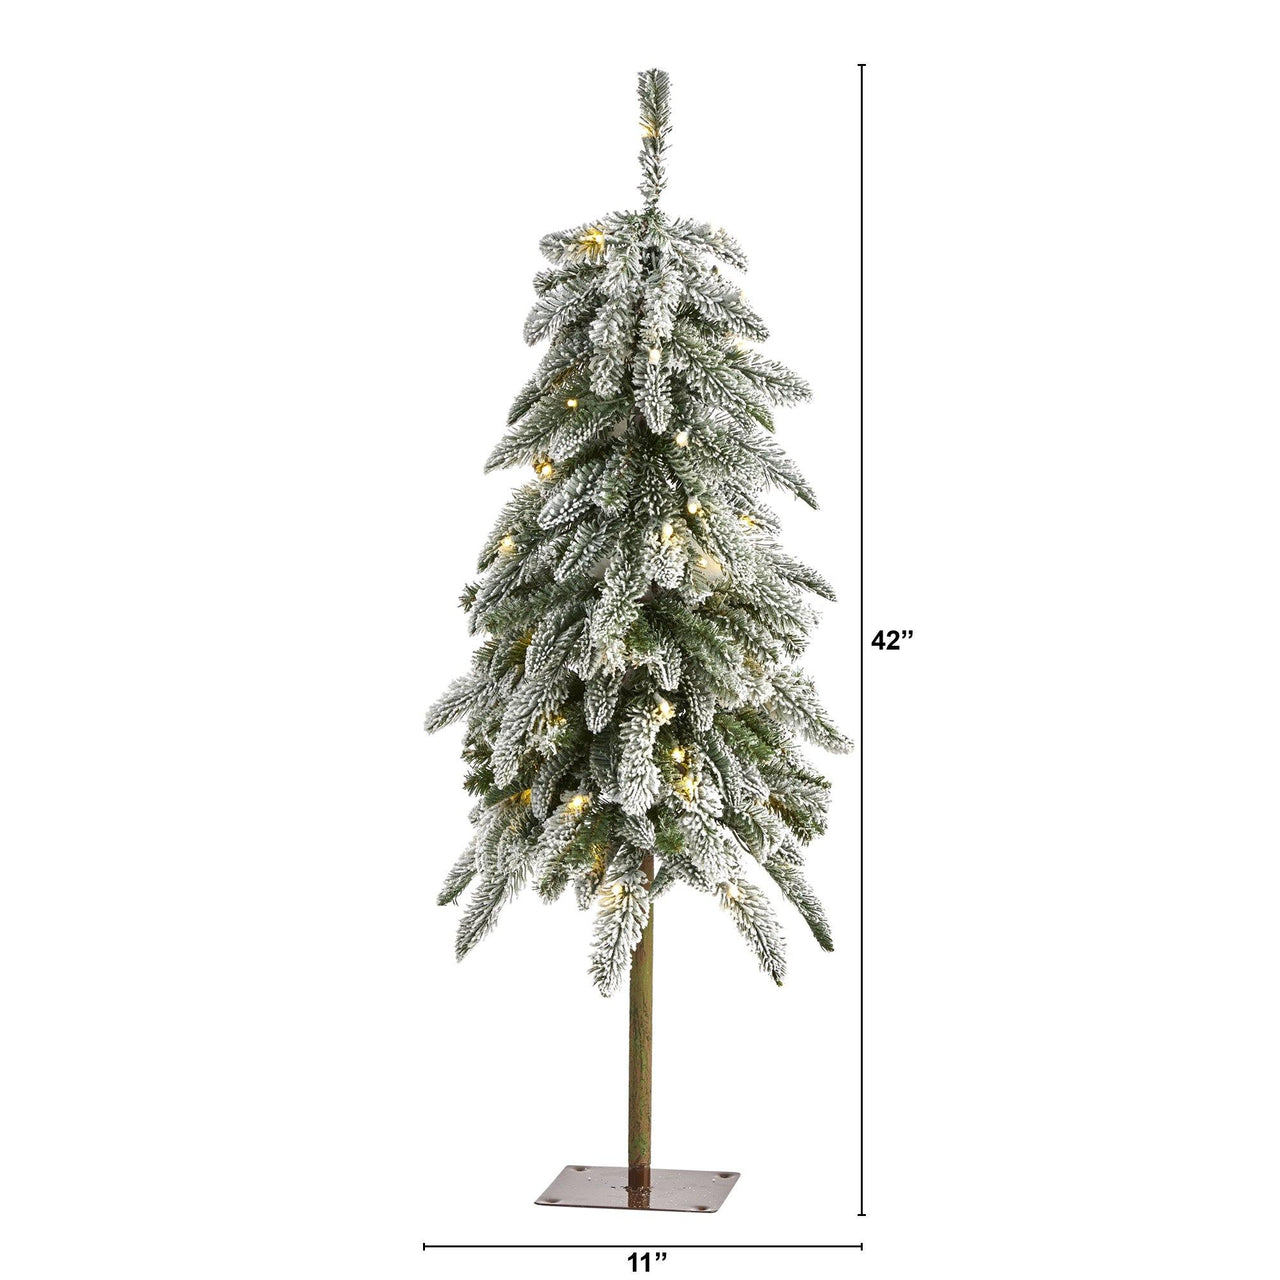 3.5’ Flocked Washington Alpine Christmas Tree with 50 White Warm LED lights and 168 Bendable Branches - The Fox Decor